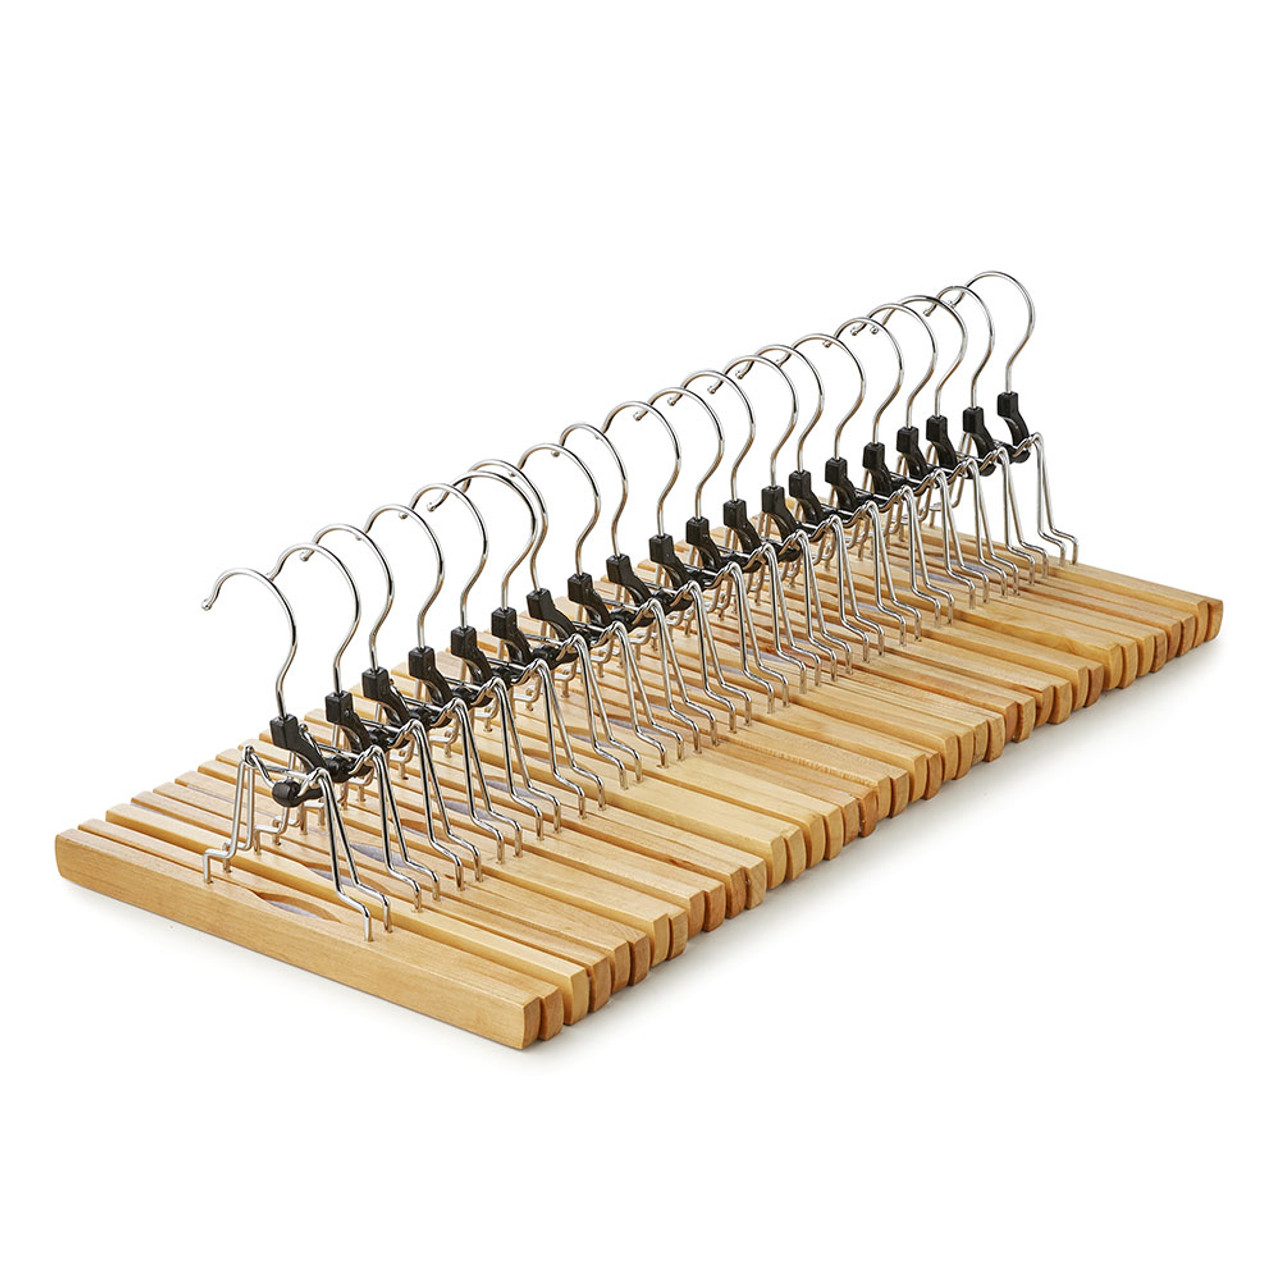 Wooden Pants Hangers with Clips 10 Pack Non Slip Skirt Hangers Smooth  Finish Solid Wood JeansSlack Hanger with 360 Swivel Hook  Pants Clip  Hangers for Skirts Slacks  Clamp Hangers 